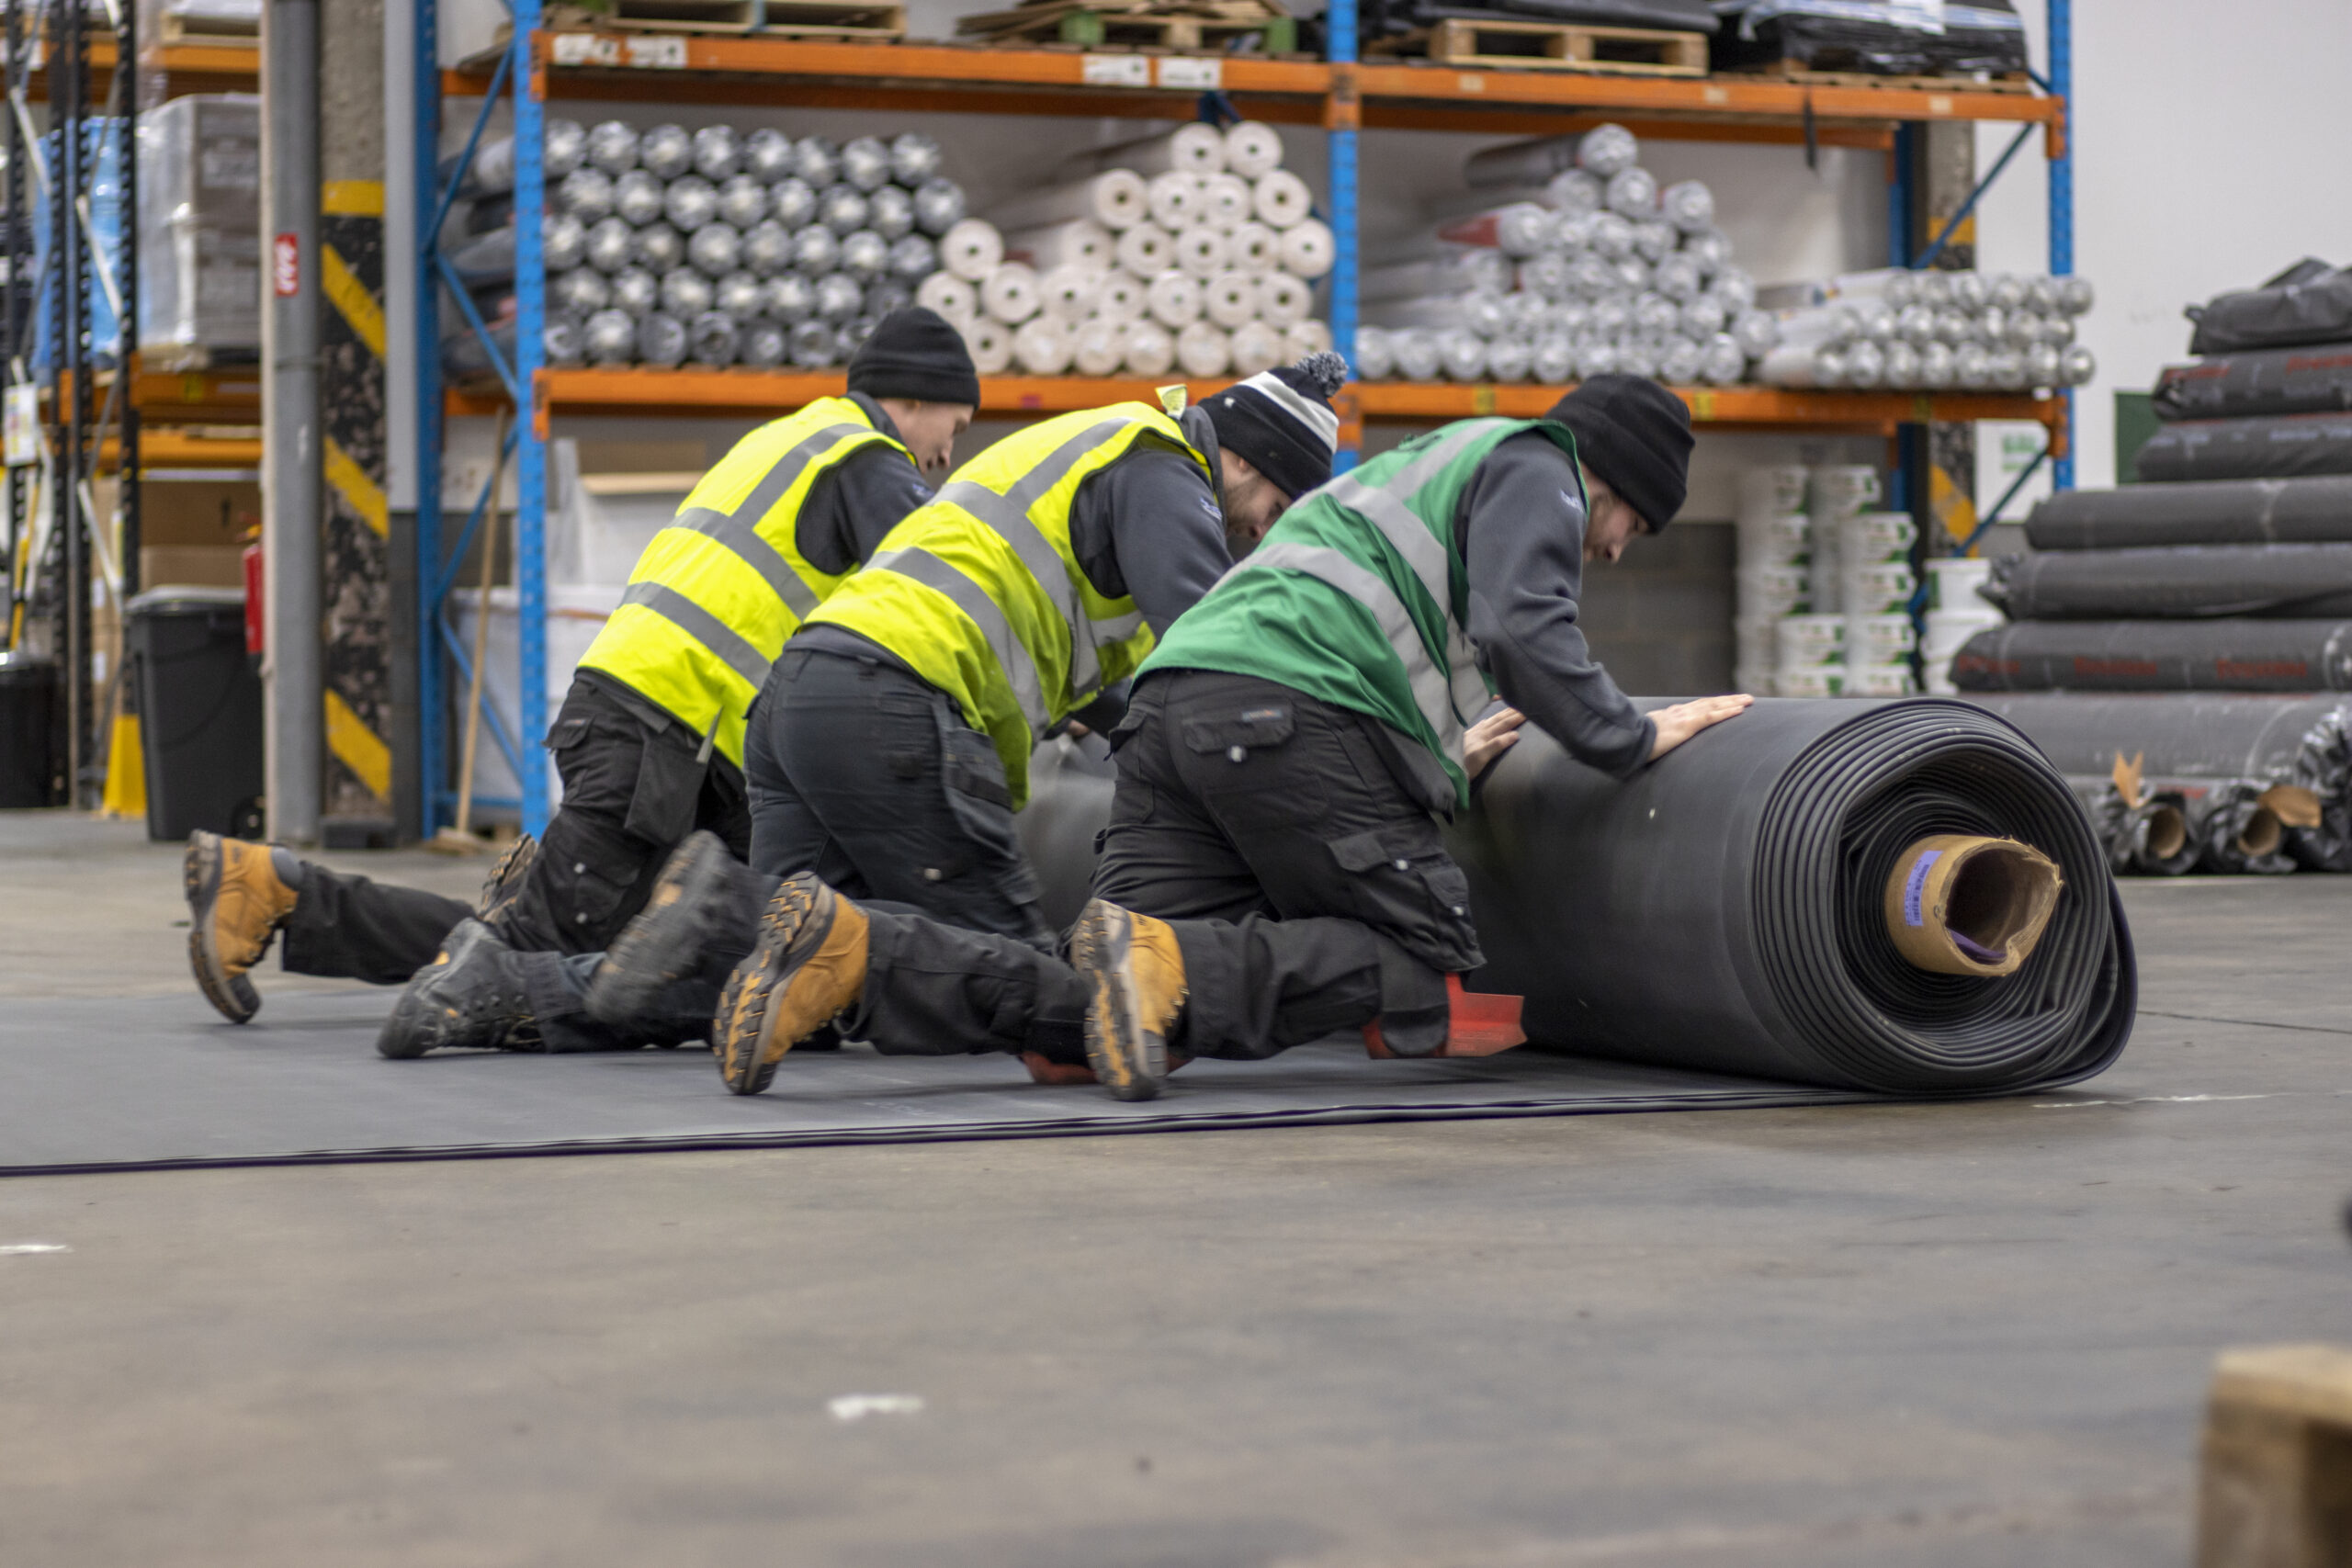 ROOFING ALL YEAR ROUND: WHY RUBBER EPDM IS A WINTER SOLUTION